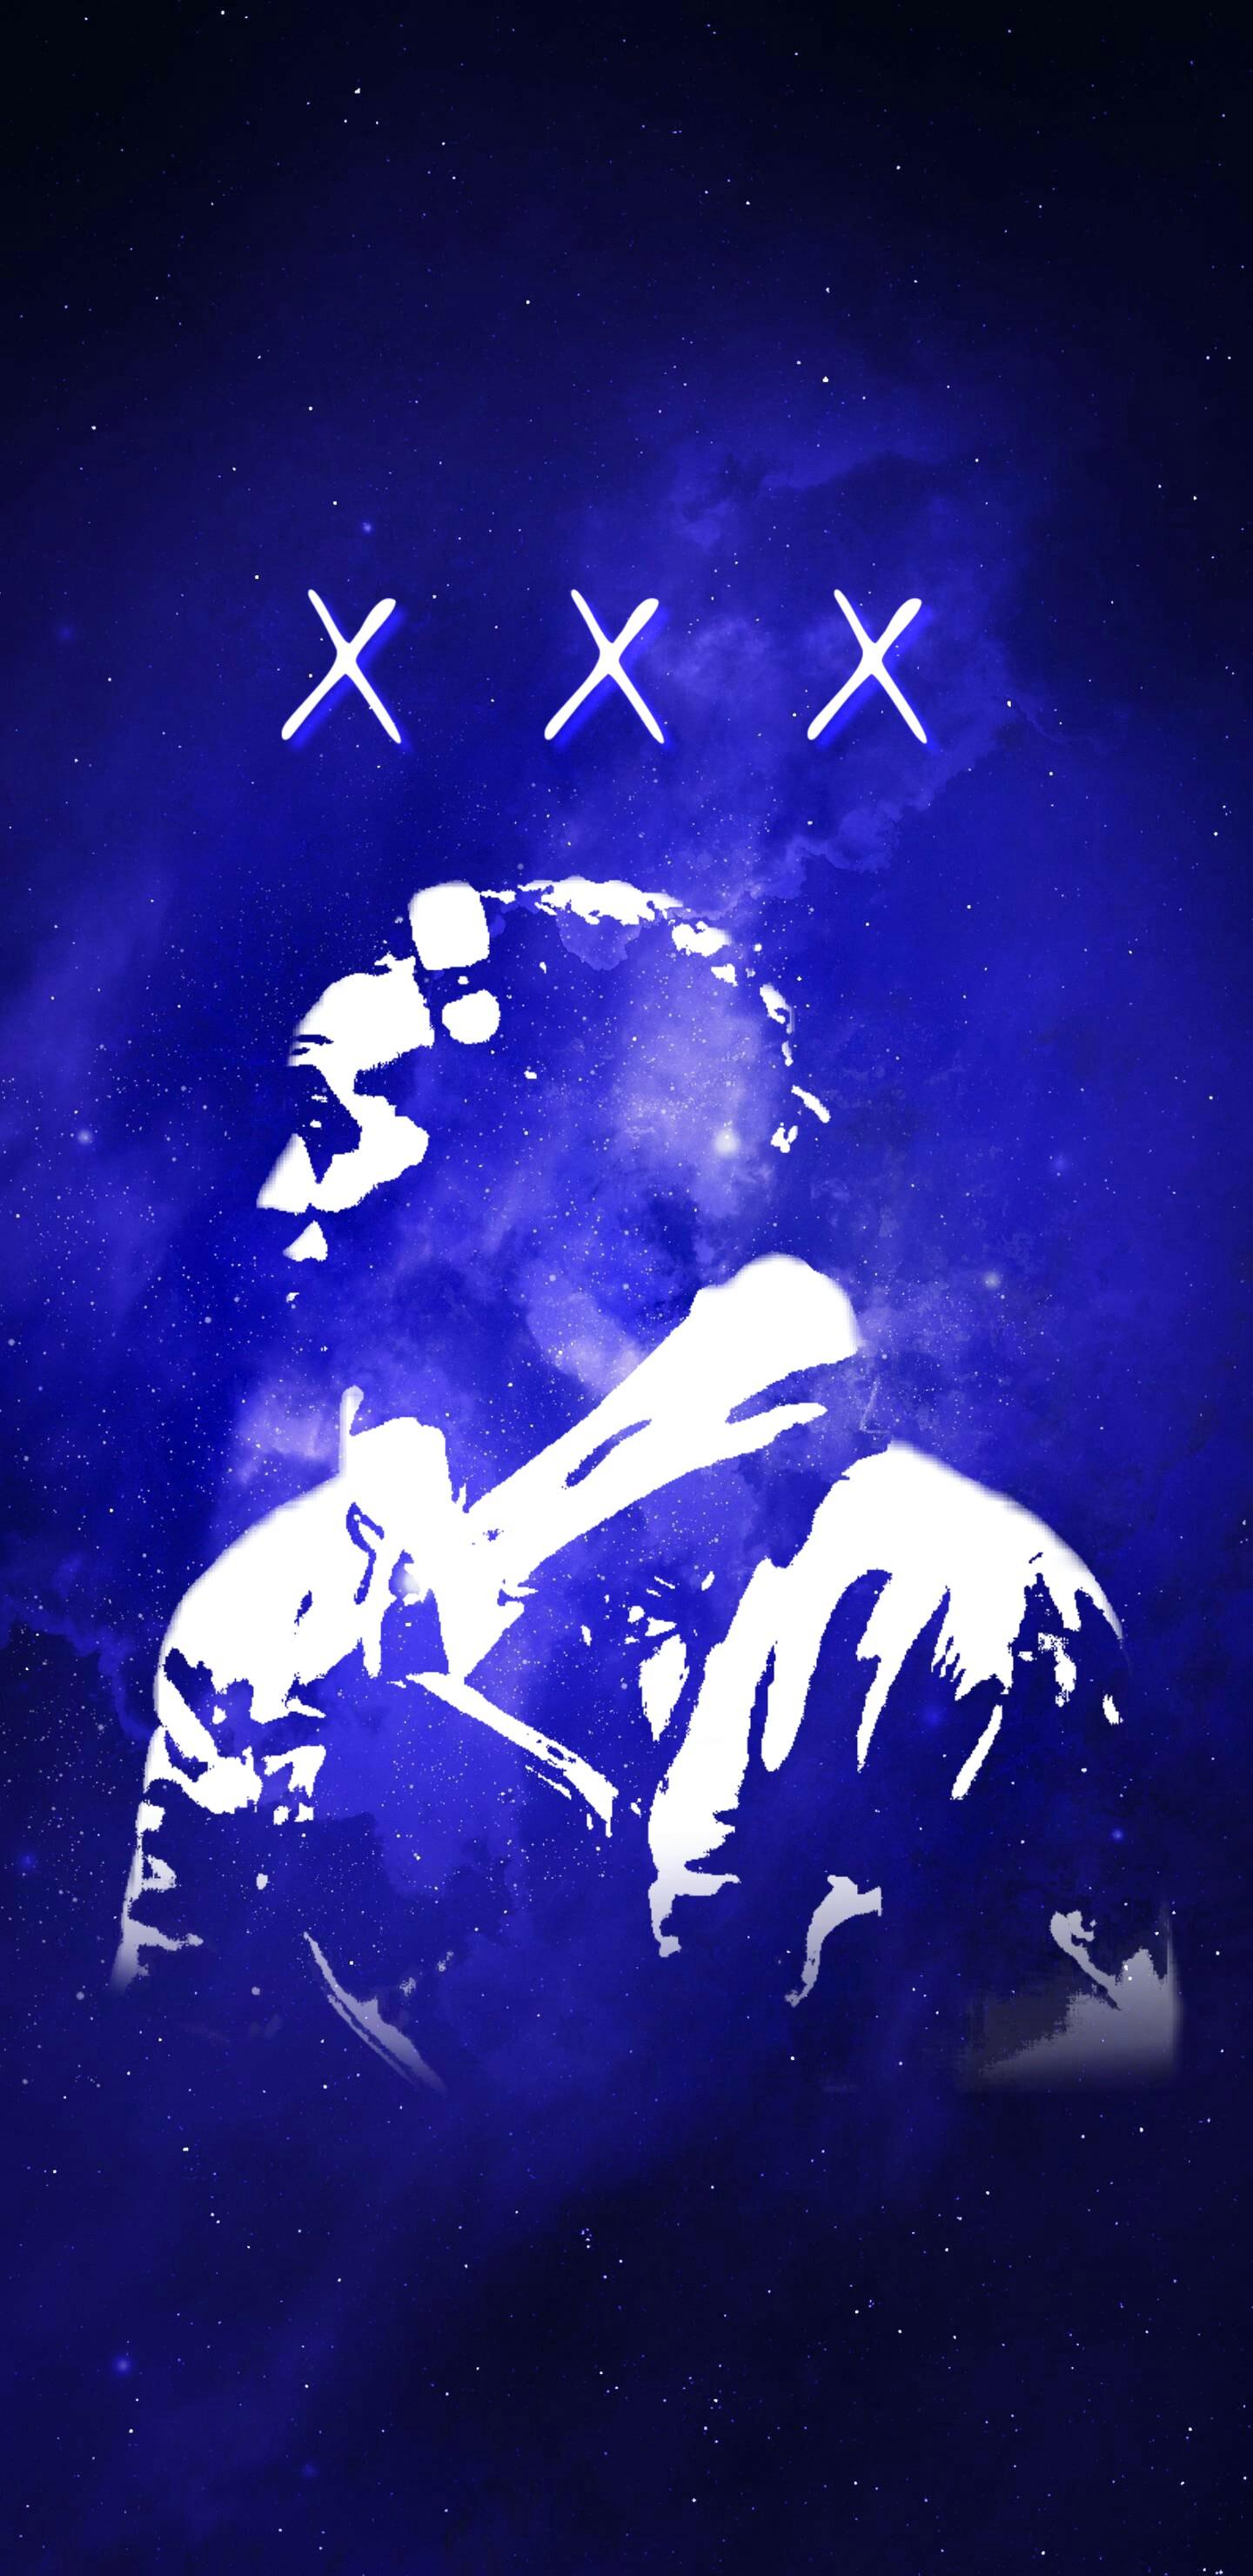 A blue poster with the words x on it - XXXTentacion, galaxy